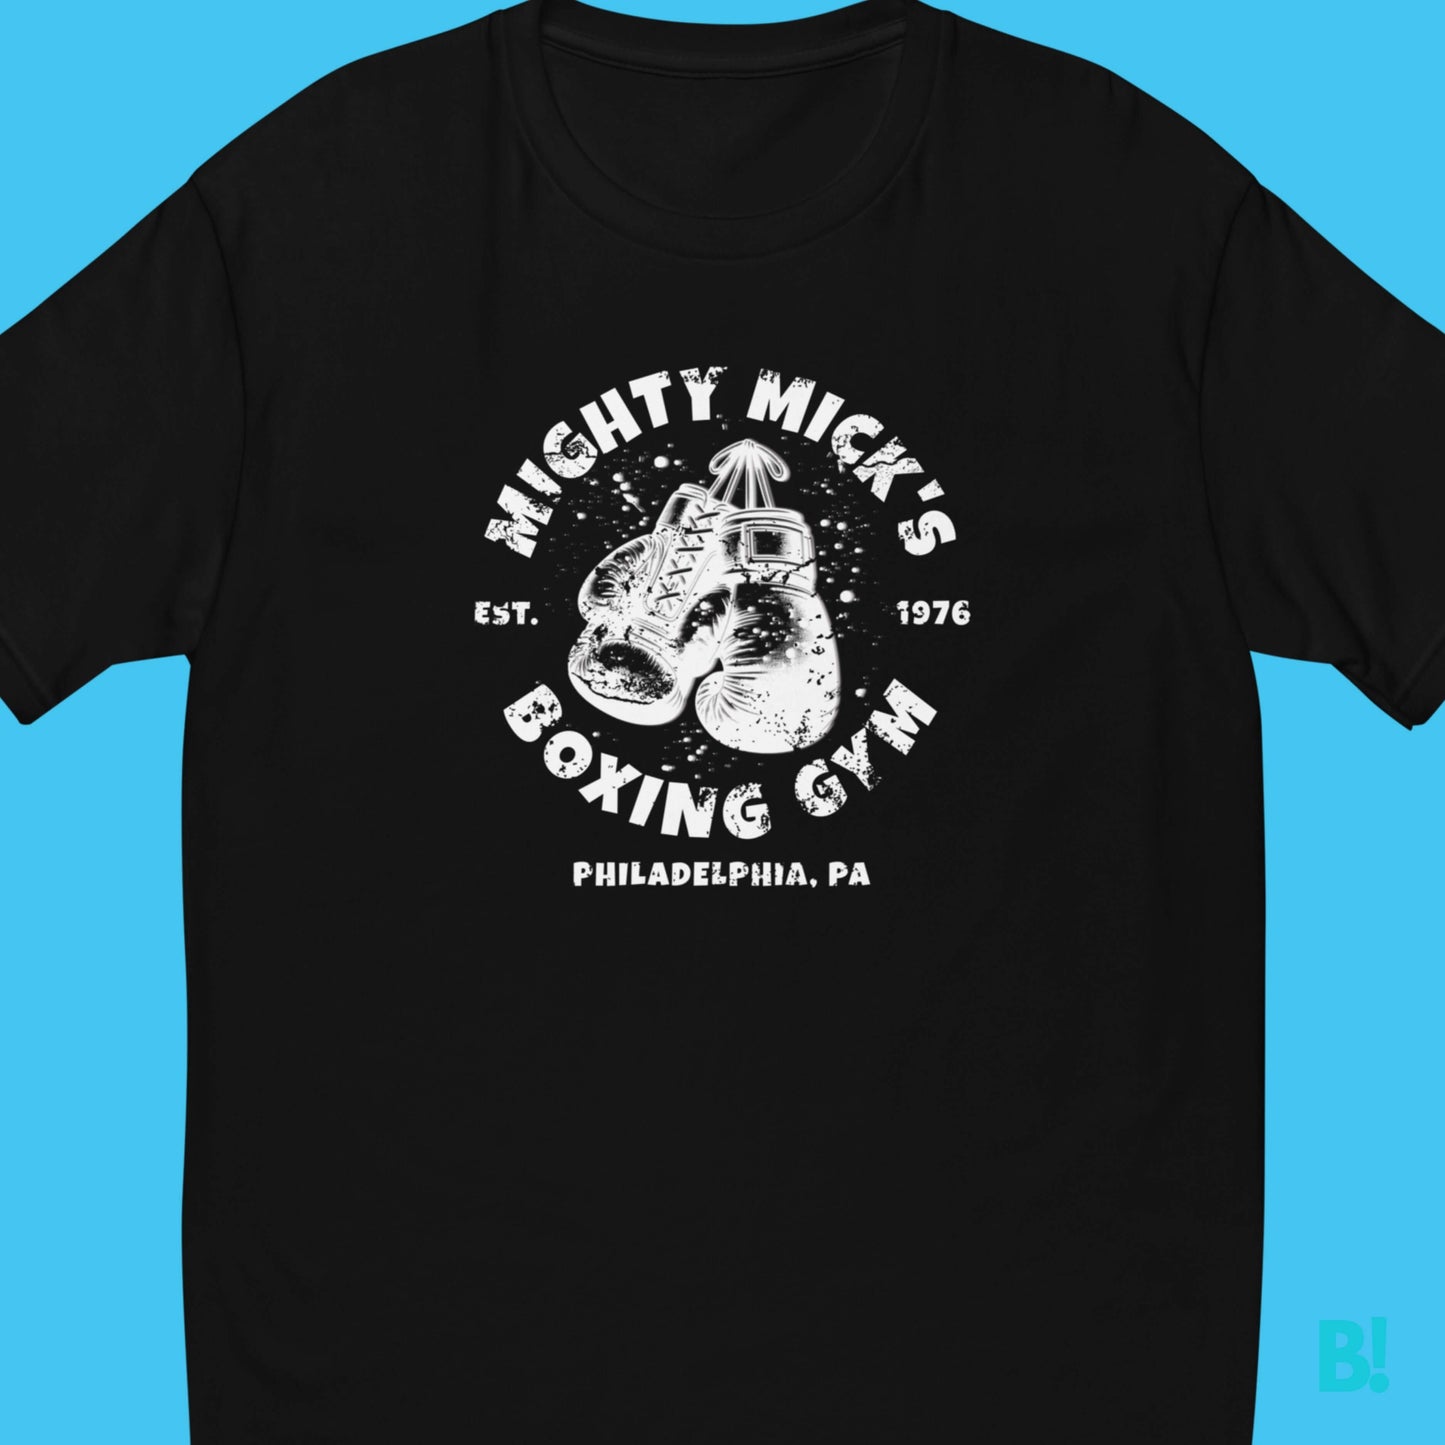 Conquer in Style with Mighty Mick's Boxing Tee Get ready to dazzle in the ring with our Mighty Mick's T-Shirt! Perfect fit, 100% cotton comfort & unique B!NKY design. Shop now for your knockout look! €34.50 B!NKY Comfywear